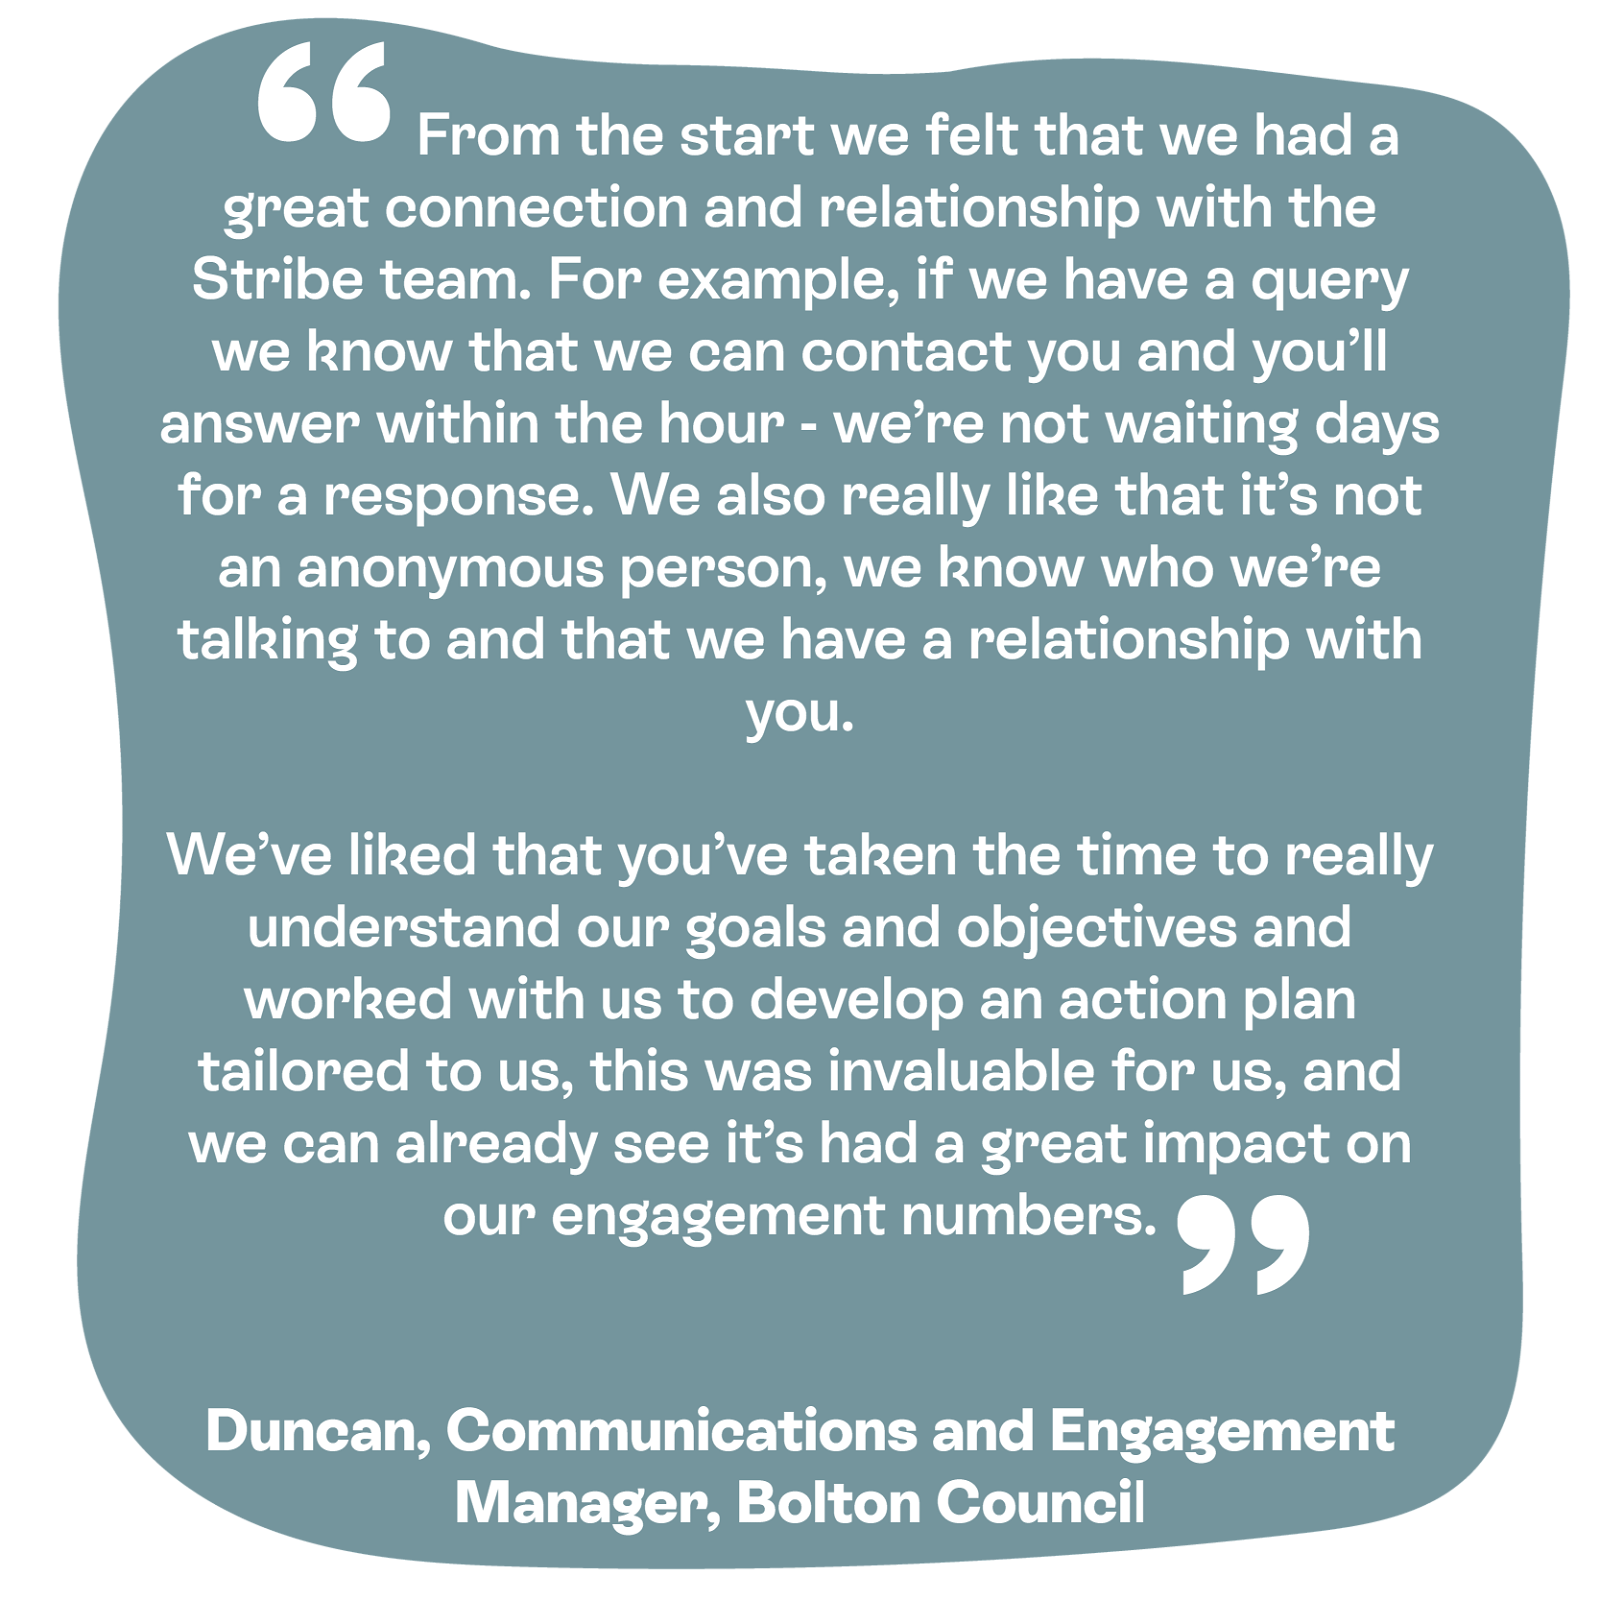 A positive testimonial for Stribe from a manager at Bolton Council.